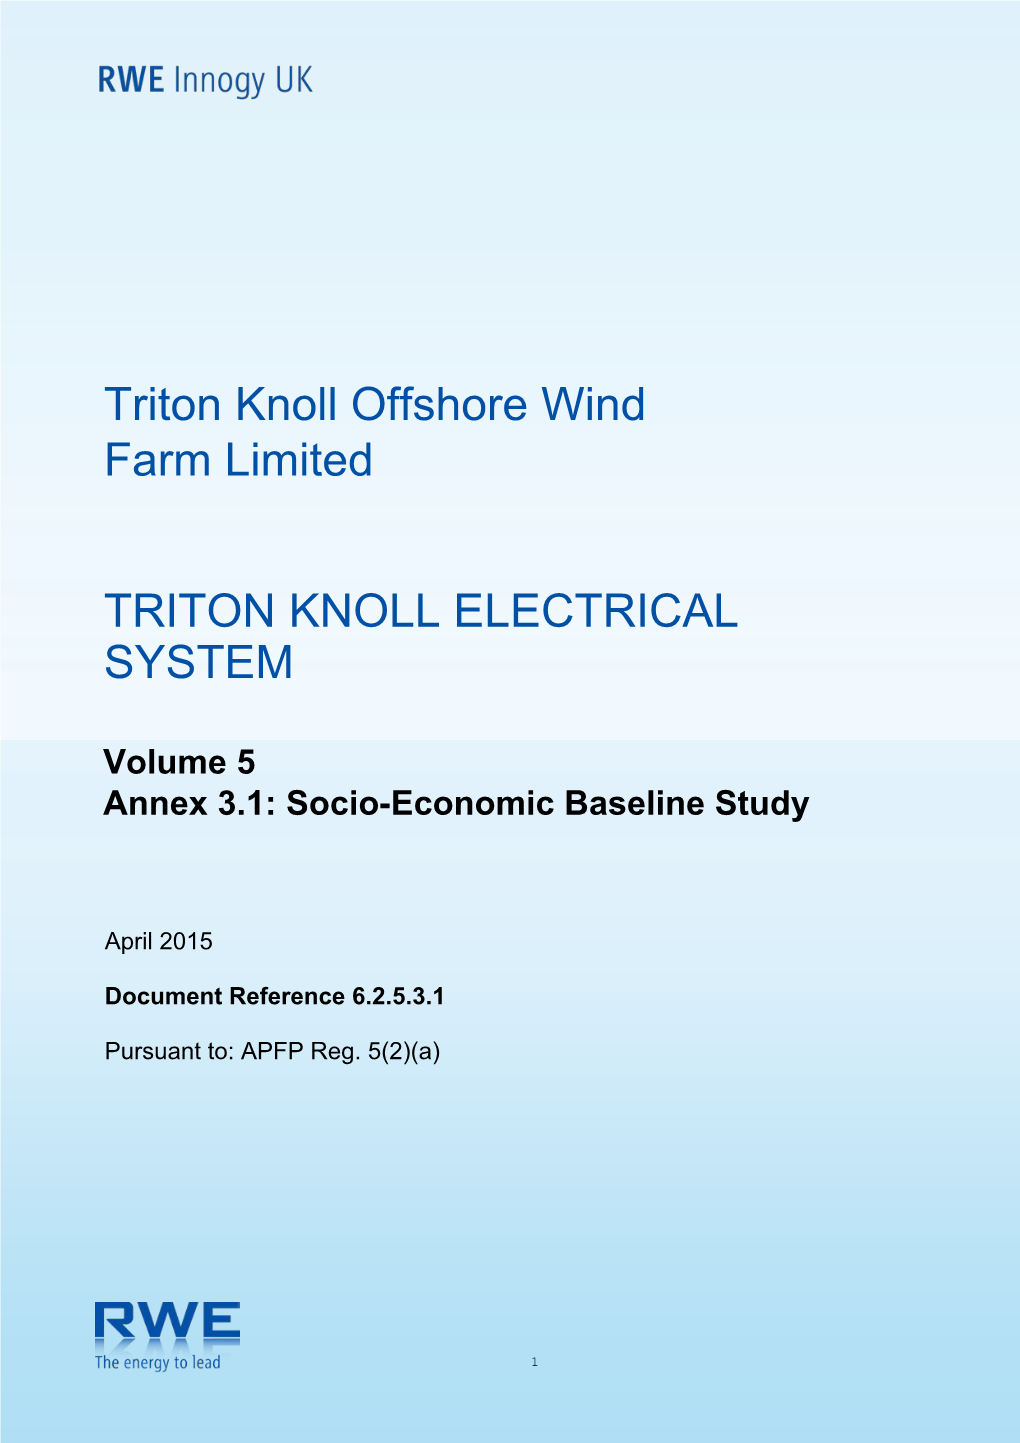 Triton Knoll Electrical System, Onshore Crossing Schedule